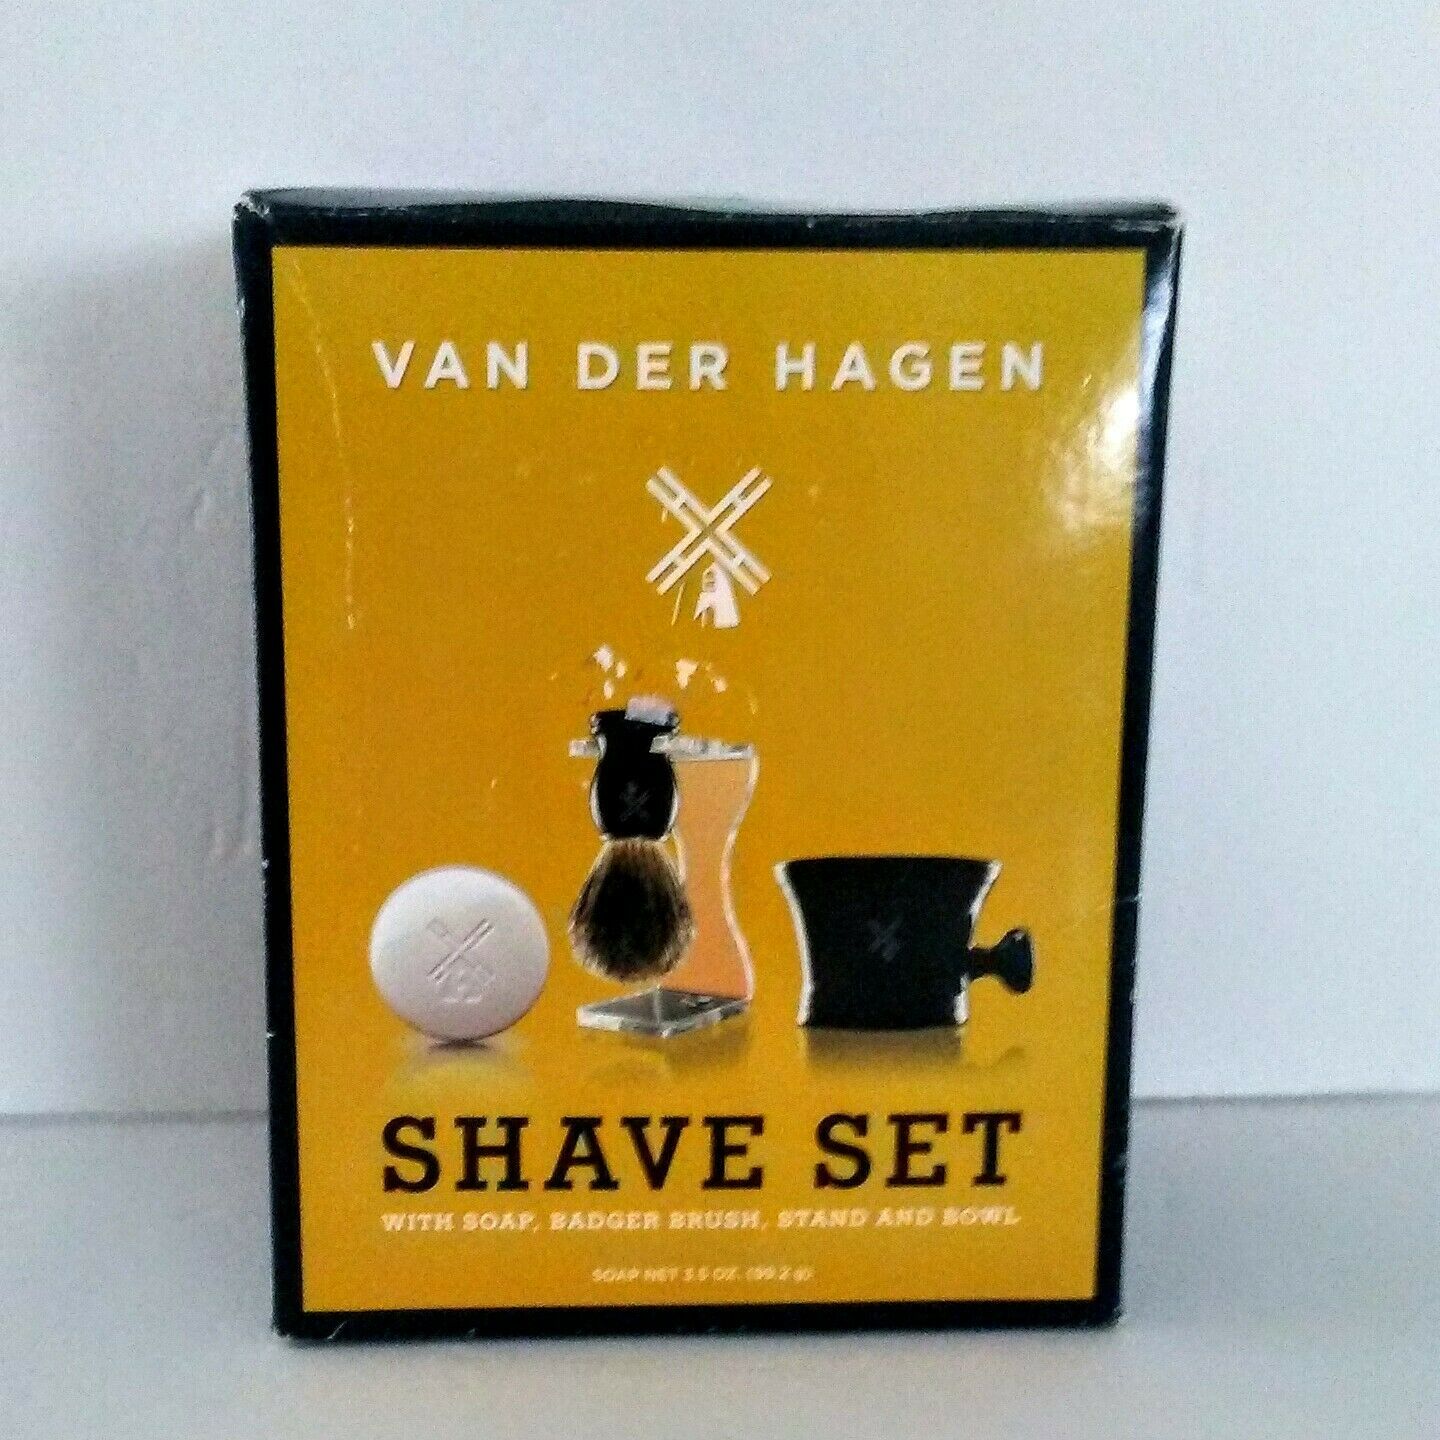 Traditional Shave Set Soap Brush Bowl And Stand Luxury Shave Van Der Hagen New